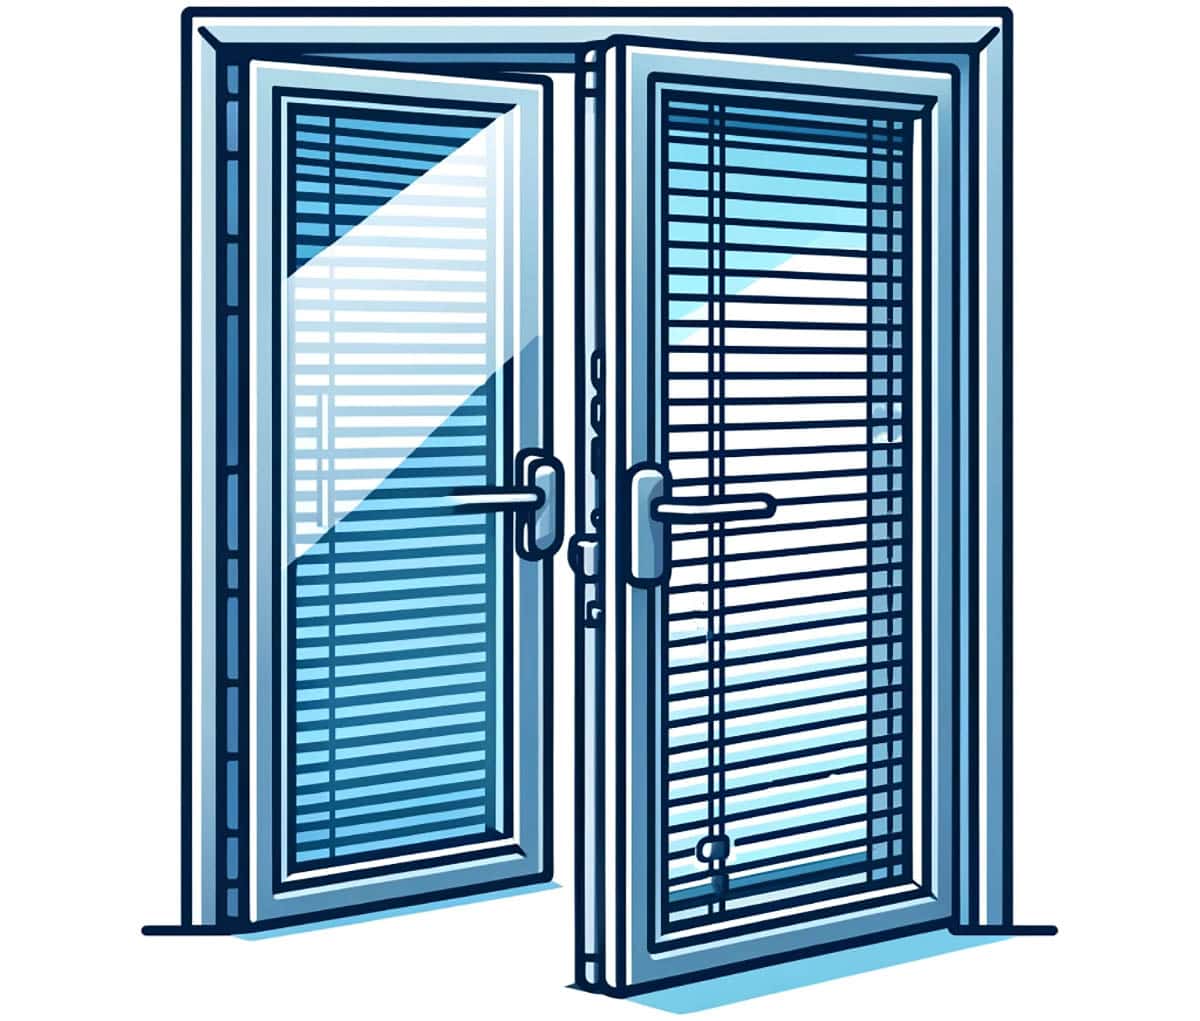 Glass double doors with blinds inside